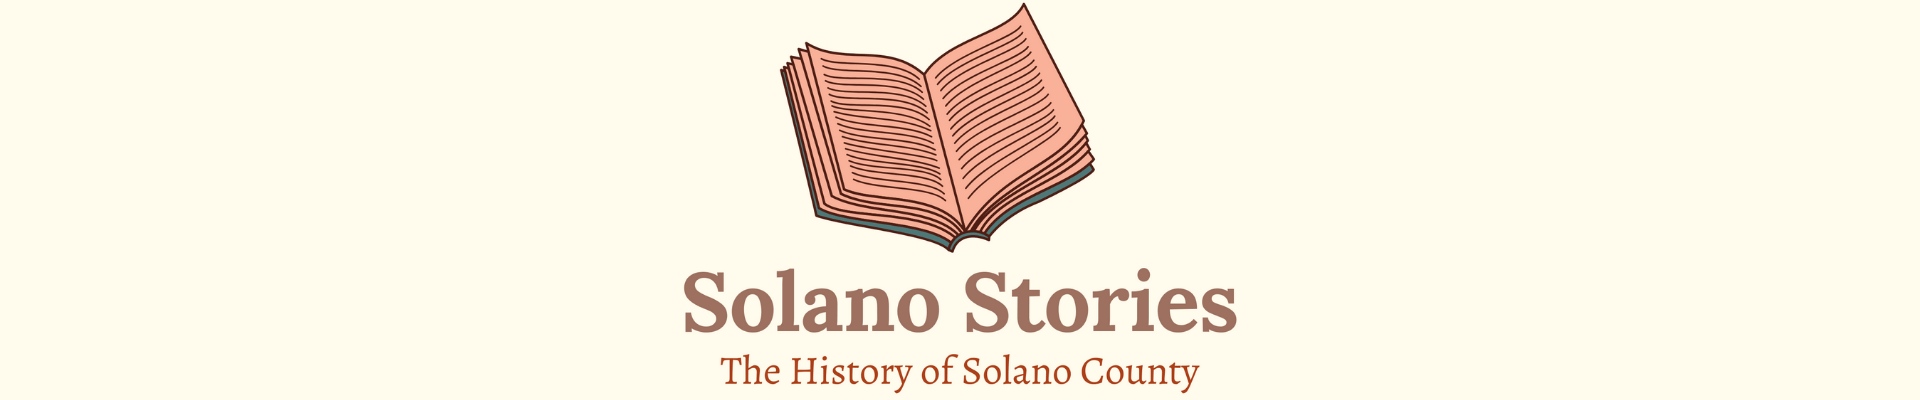 Solano Stories, explore the history of Solano County with Solano County Library!